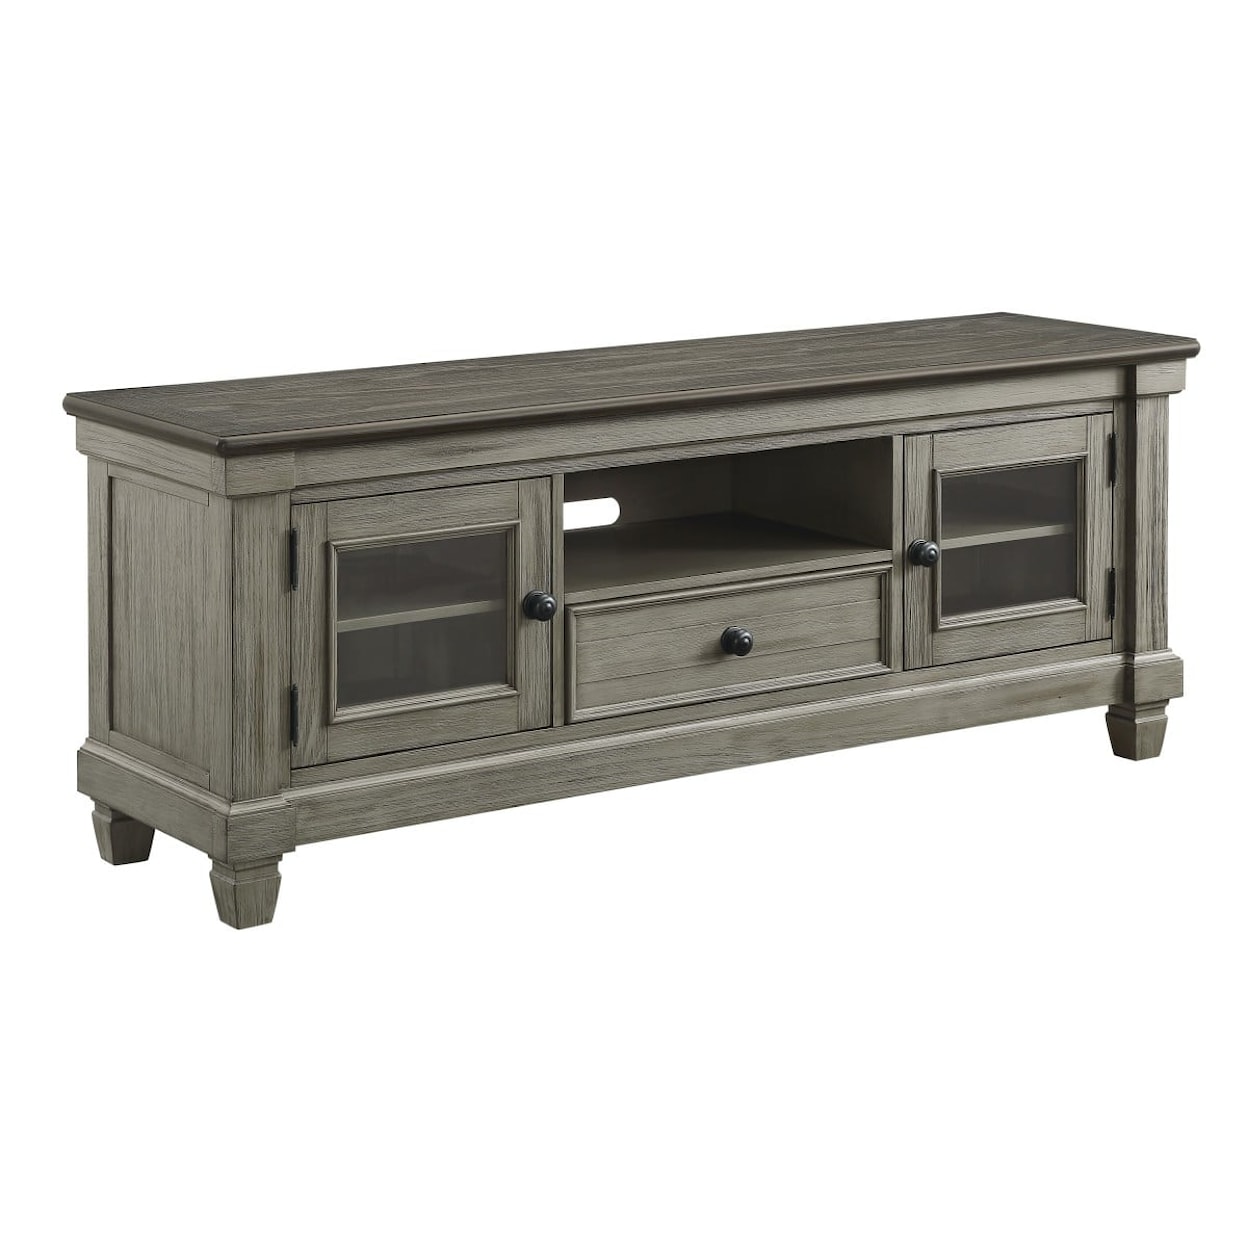 Homelegance Granby TV Stand